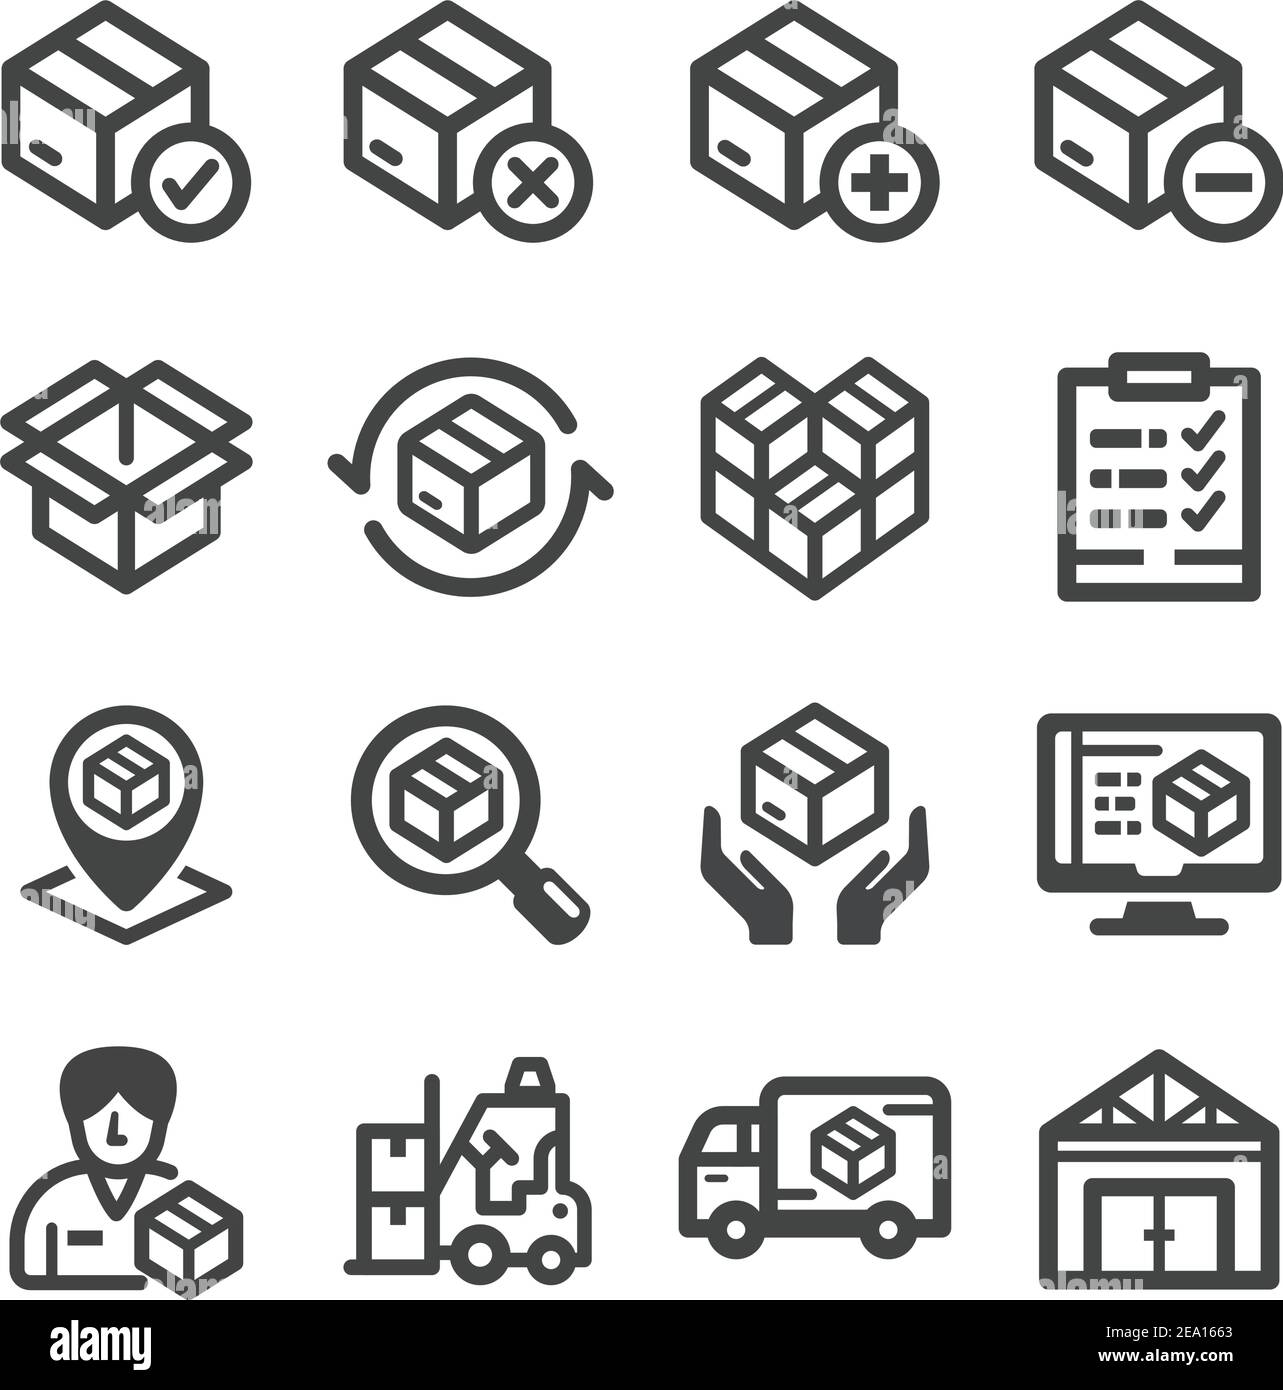 stock,stockpile icon,vector and illustration Stock Vector